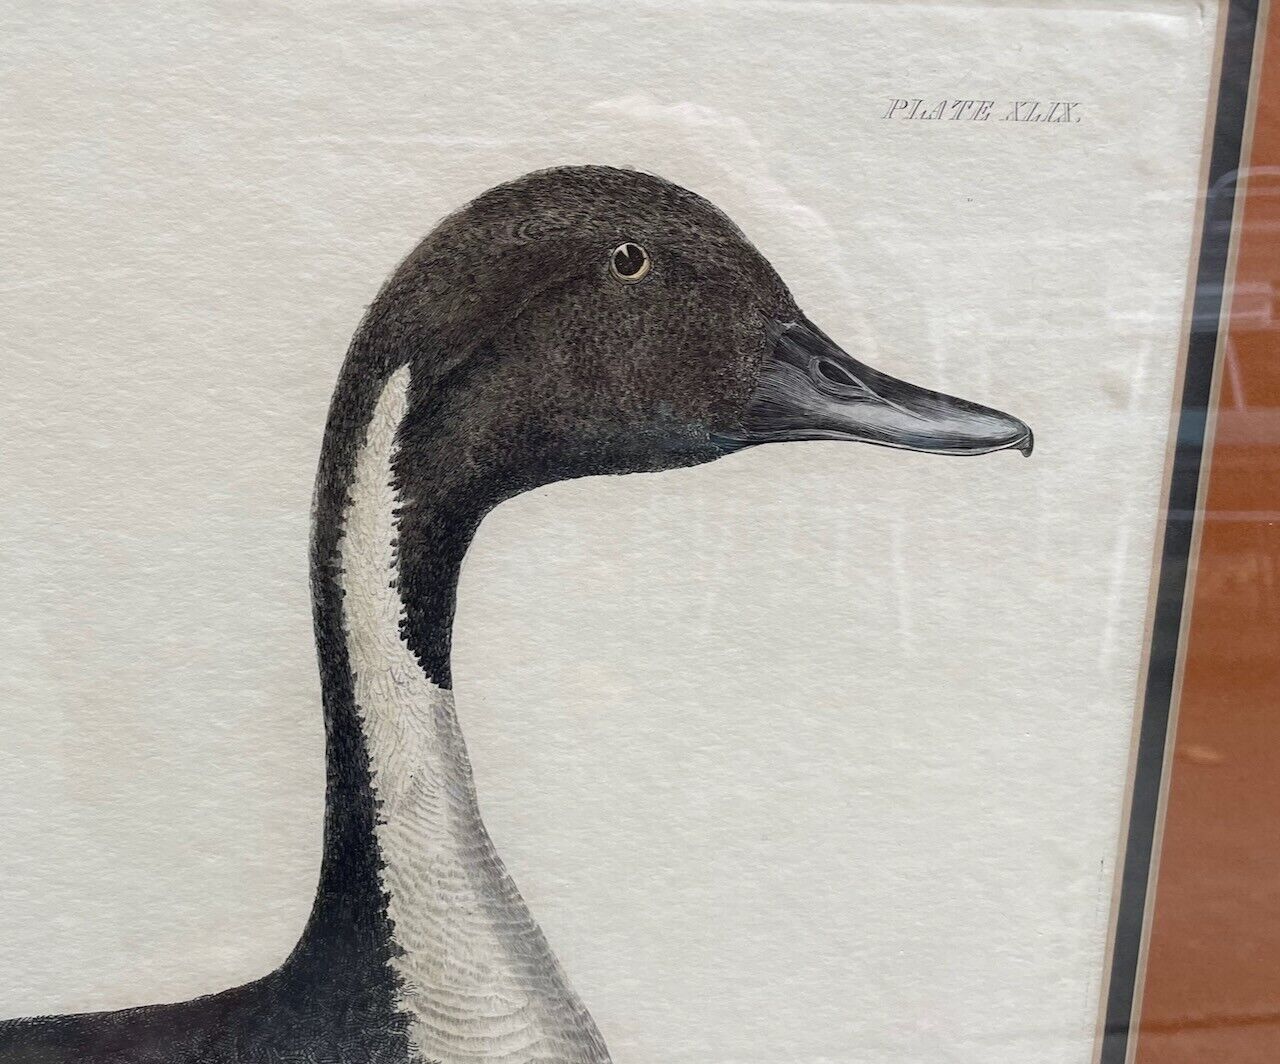 Prideaux John Selby "Common Pintail" Framed Hand-Colored Copper Engraving Без бренда - фотография #3